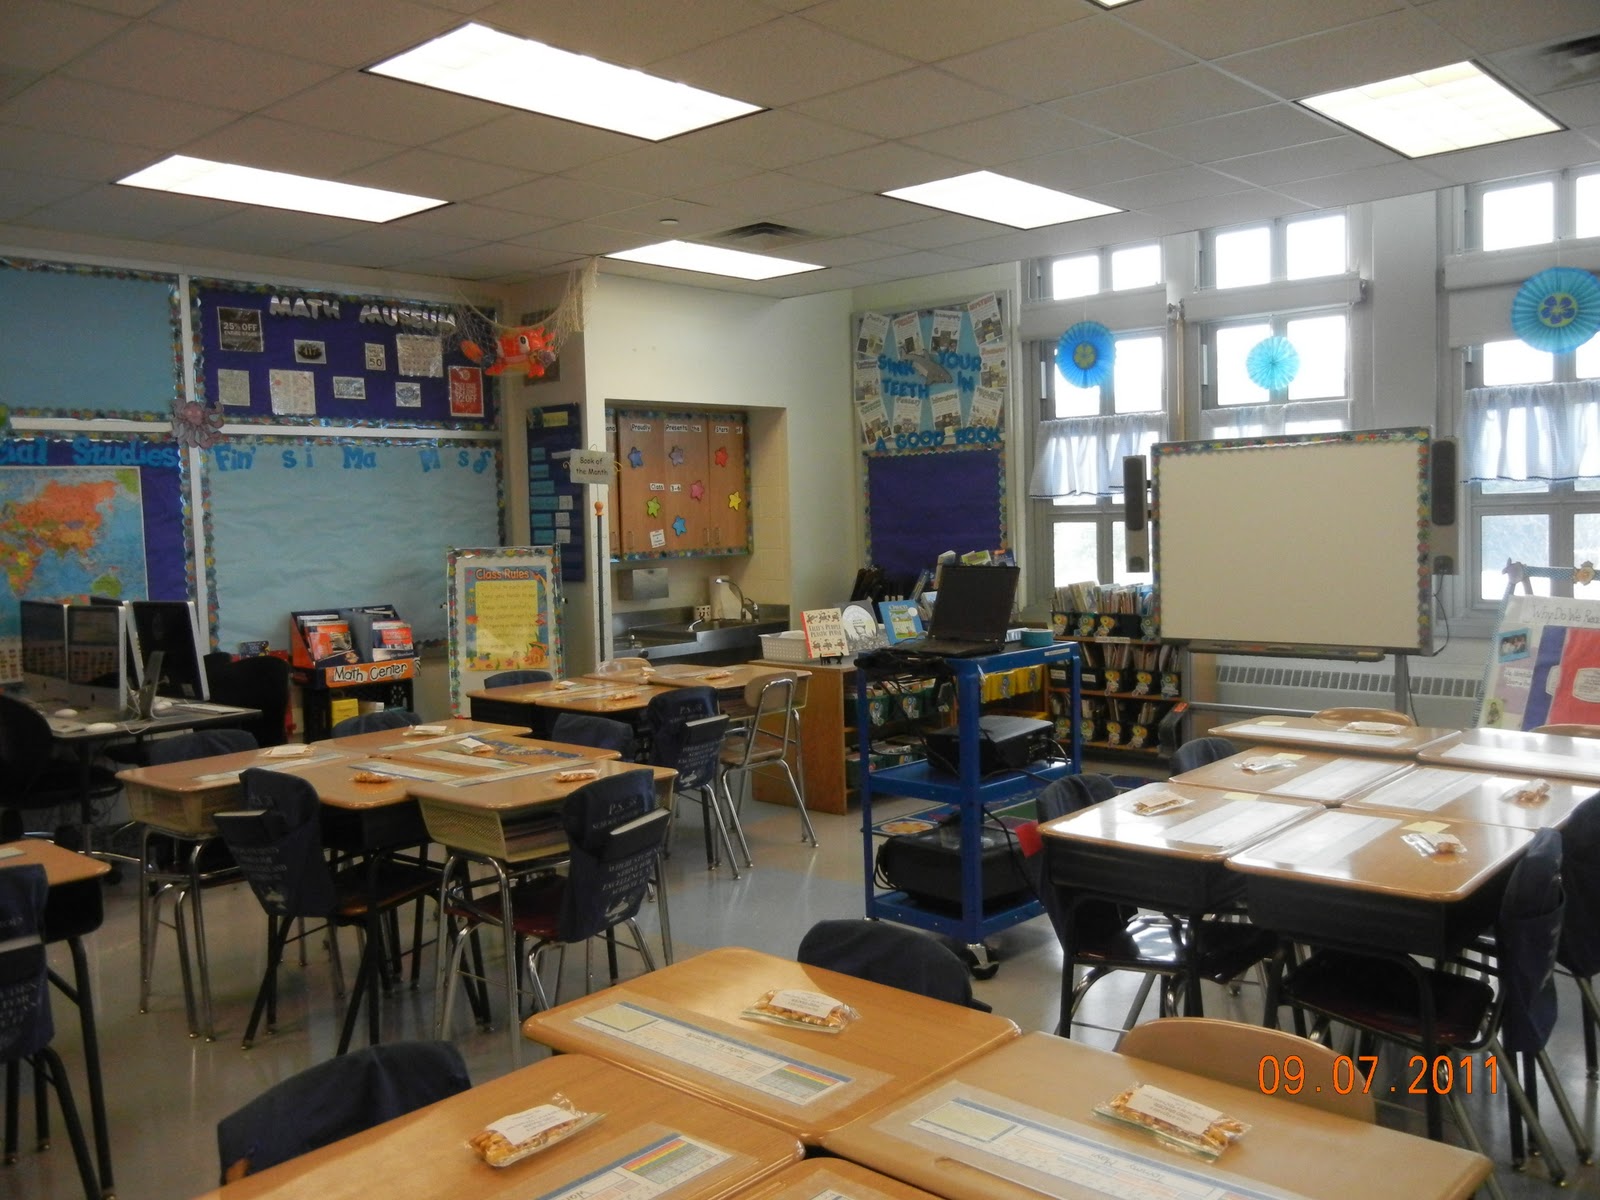 Charmed In Third Grade: Inside My Classroom!